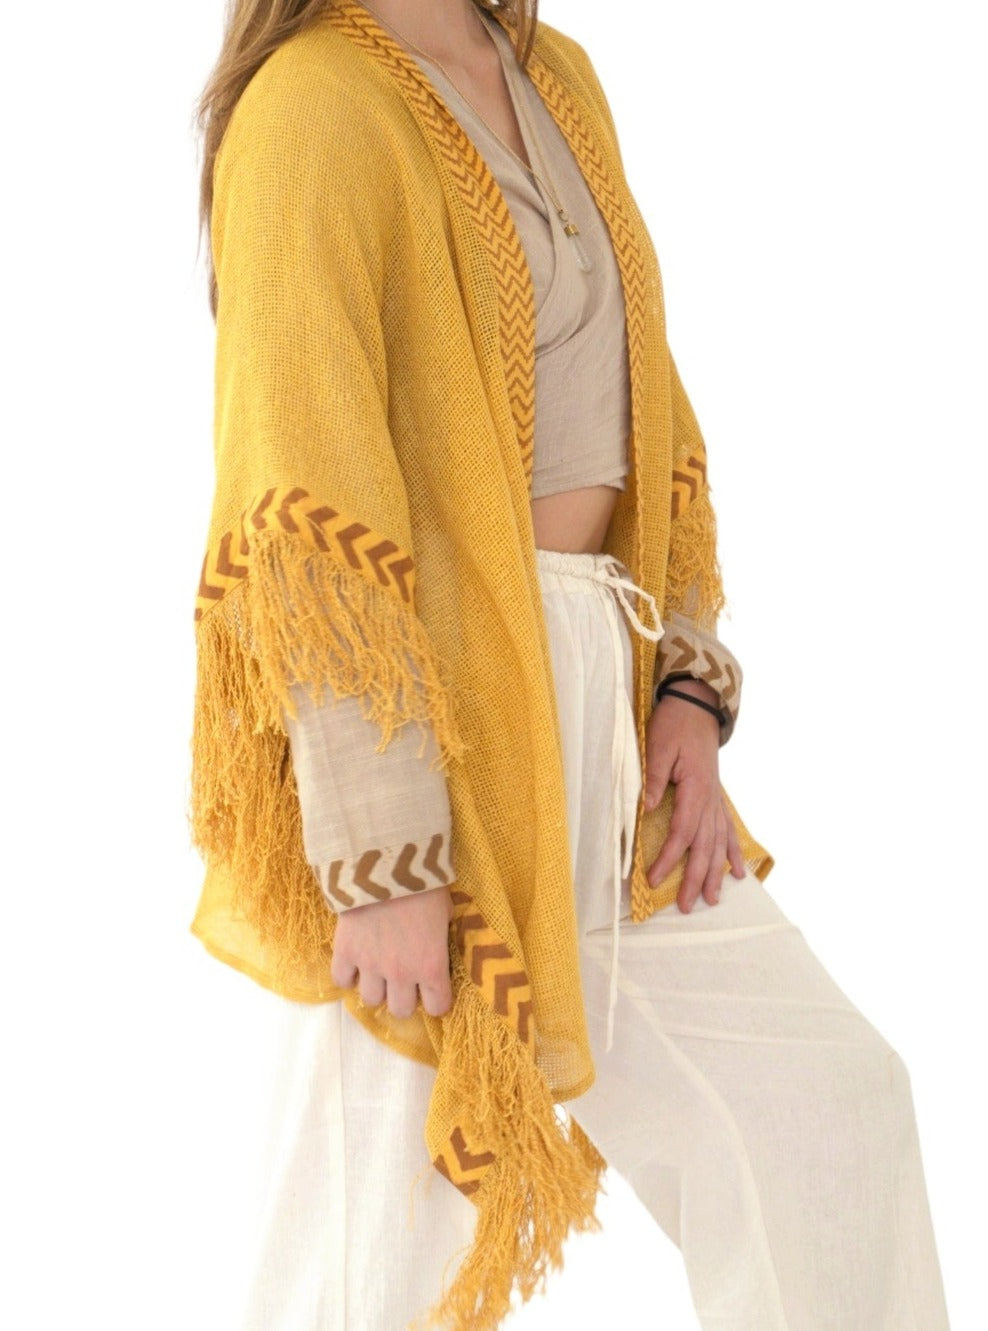 Turmeric Mesh Open Poncho with Fringe